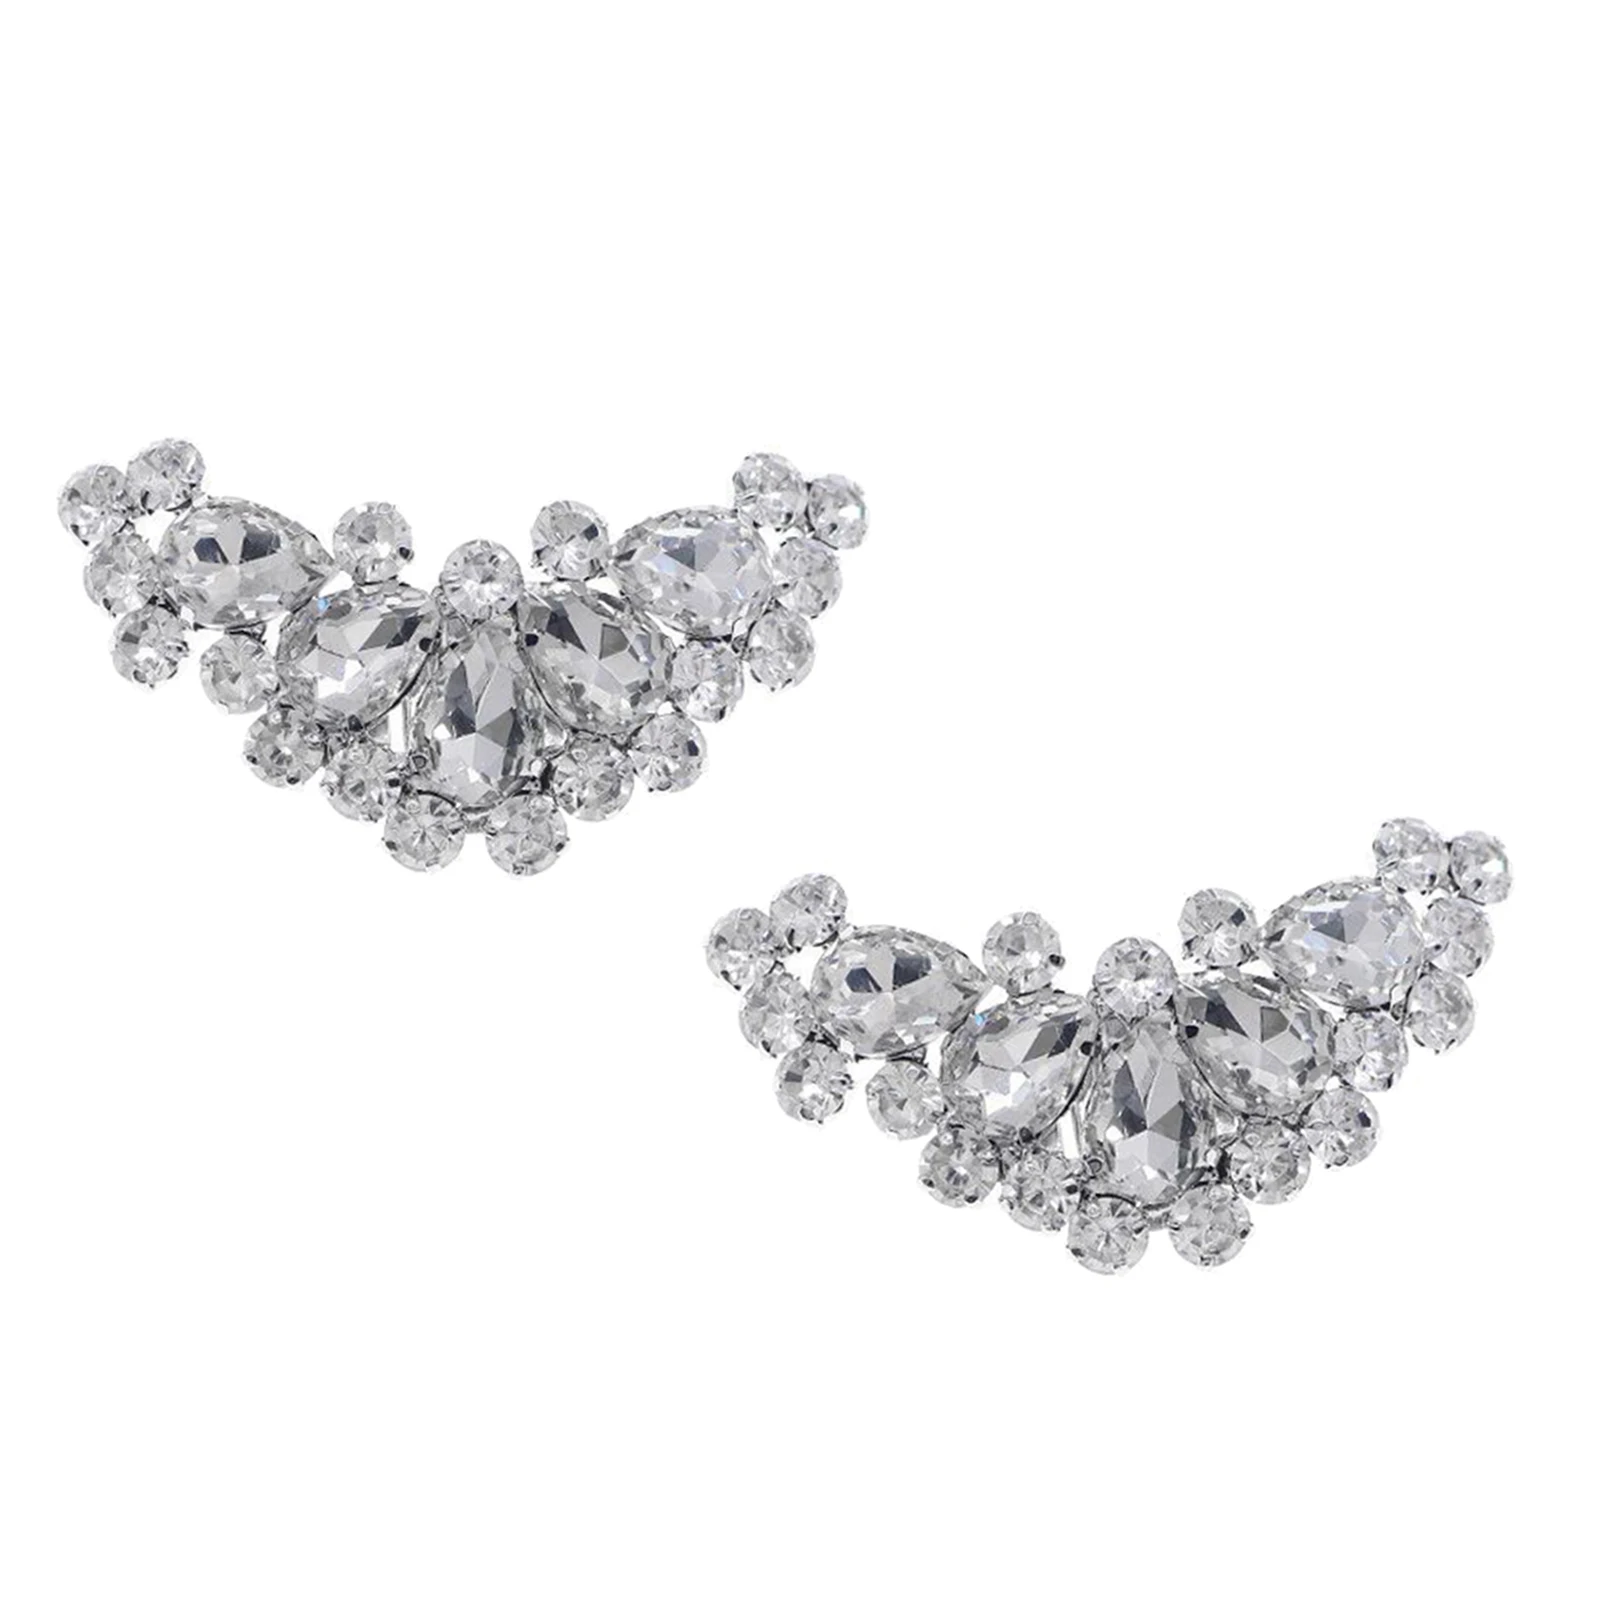 Wedding Bridal Crystal Shoe Clips Removable Rhinestone Shoe Buckles Accessories